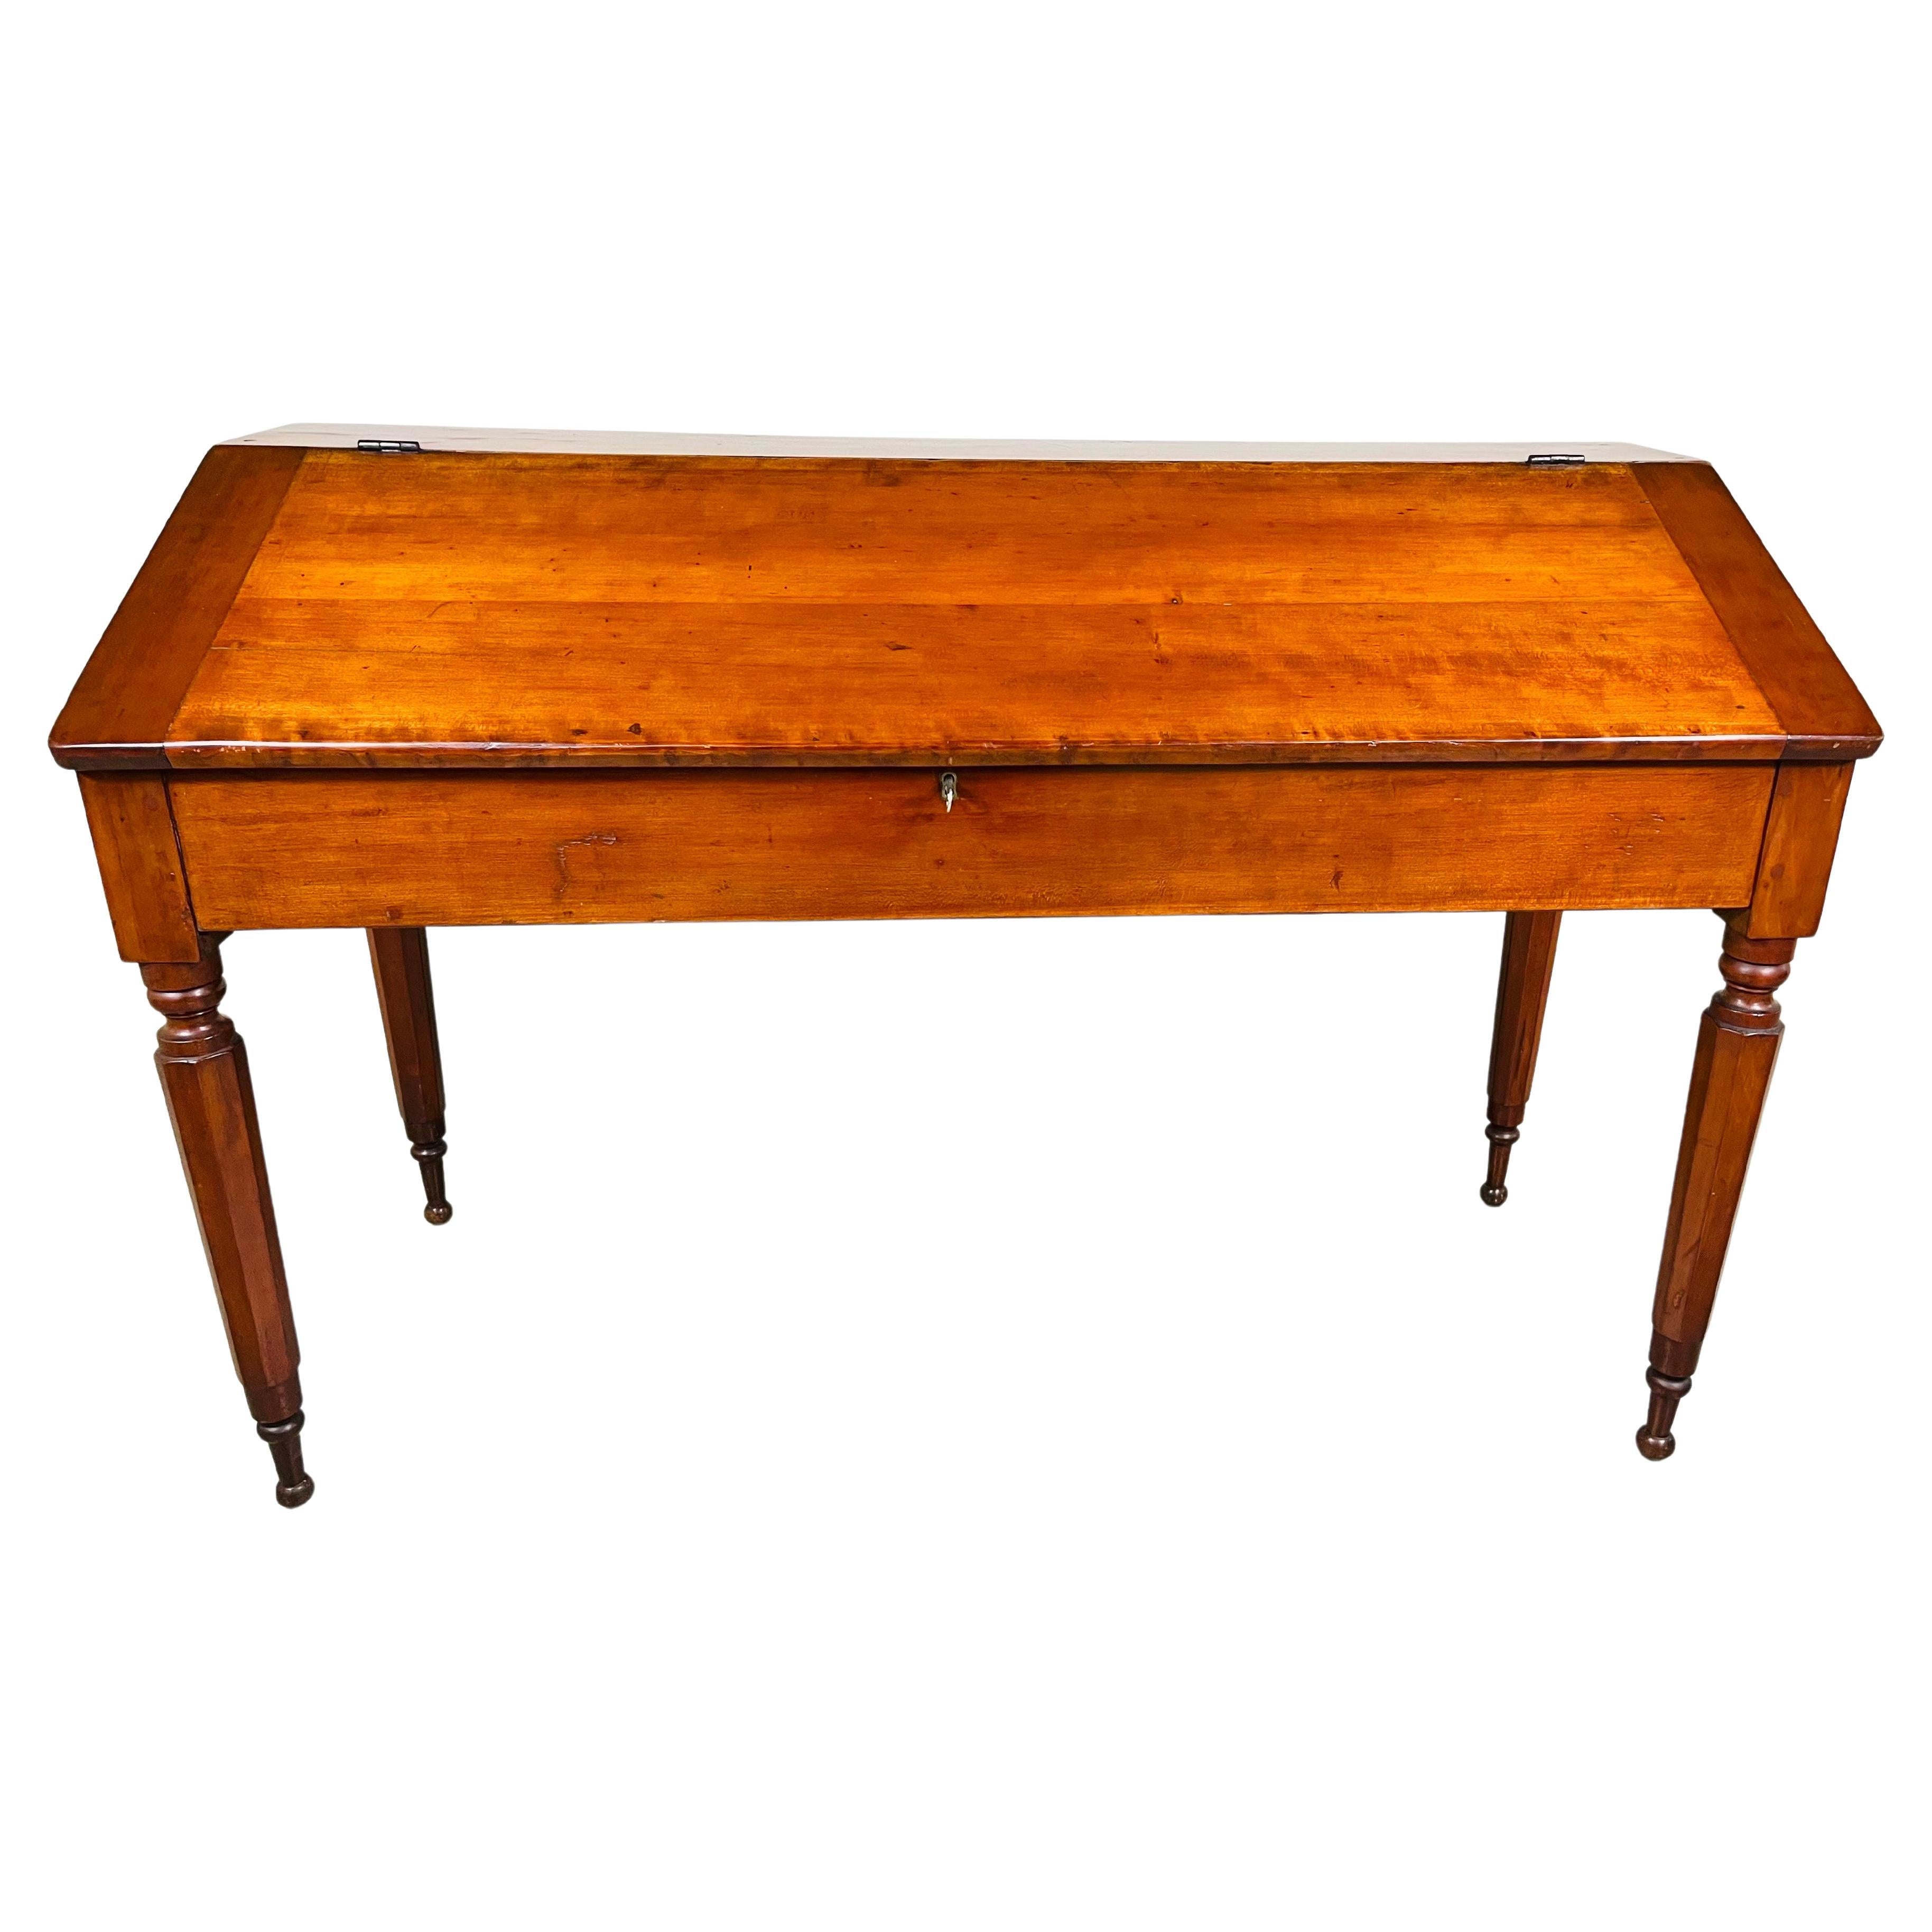 A stunning piece of history in this circa 1860 American Slant Front Schoolmasters desk constructed with Poplar wood with hand carved geometric legs that feature ball accents at the top and feet. Original lock is present with original key but does